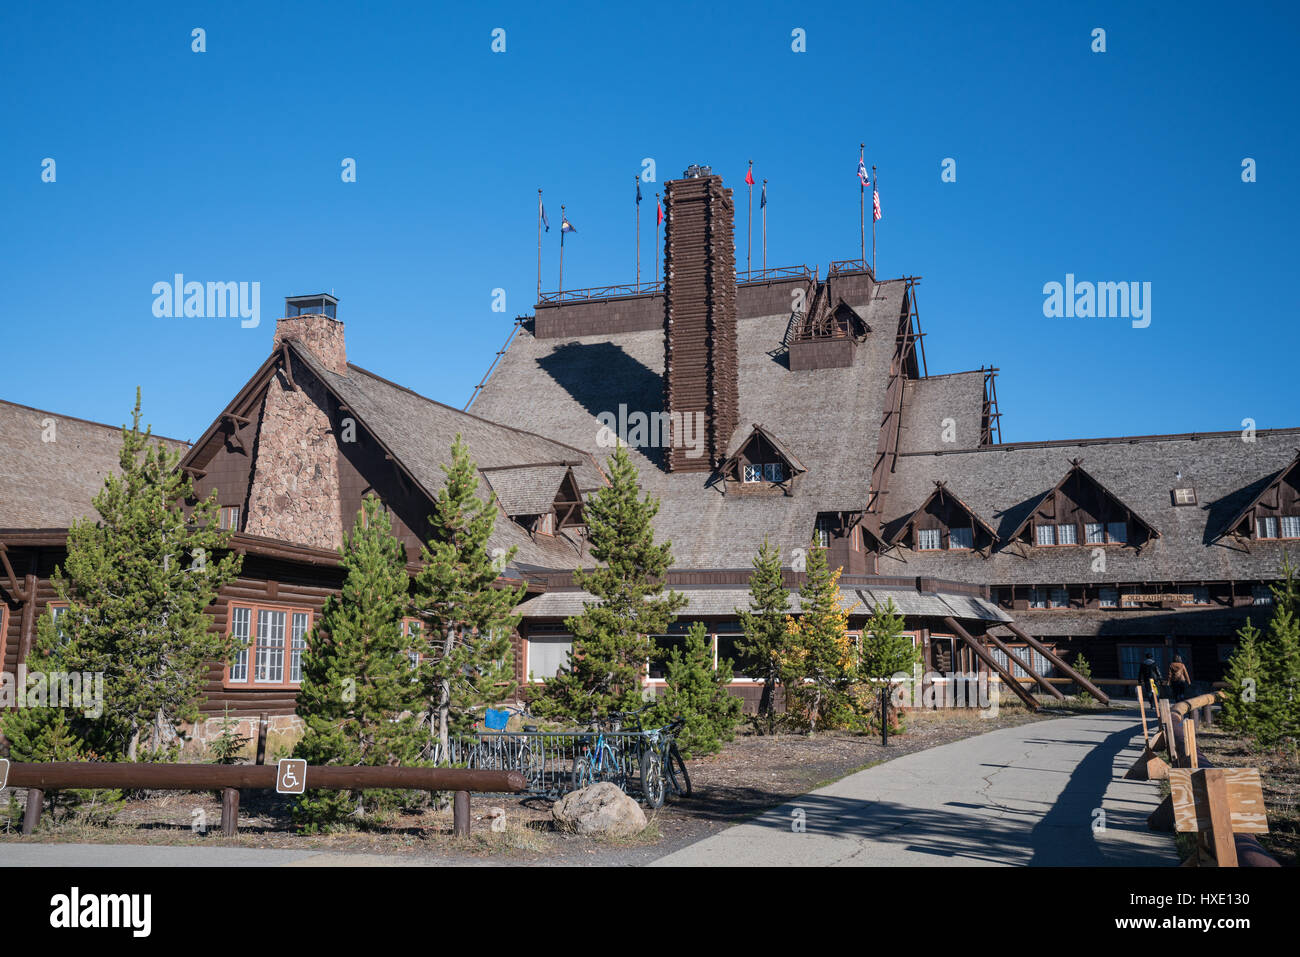 YELLOWSTONE, WY - SEPTEMBER 27: Exterior of the historic Old Faithful Inn in Yellowstone National Park, Wyoming.  Built in 1904, the inn is considered Stock Photo